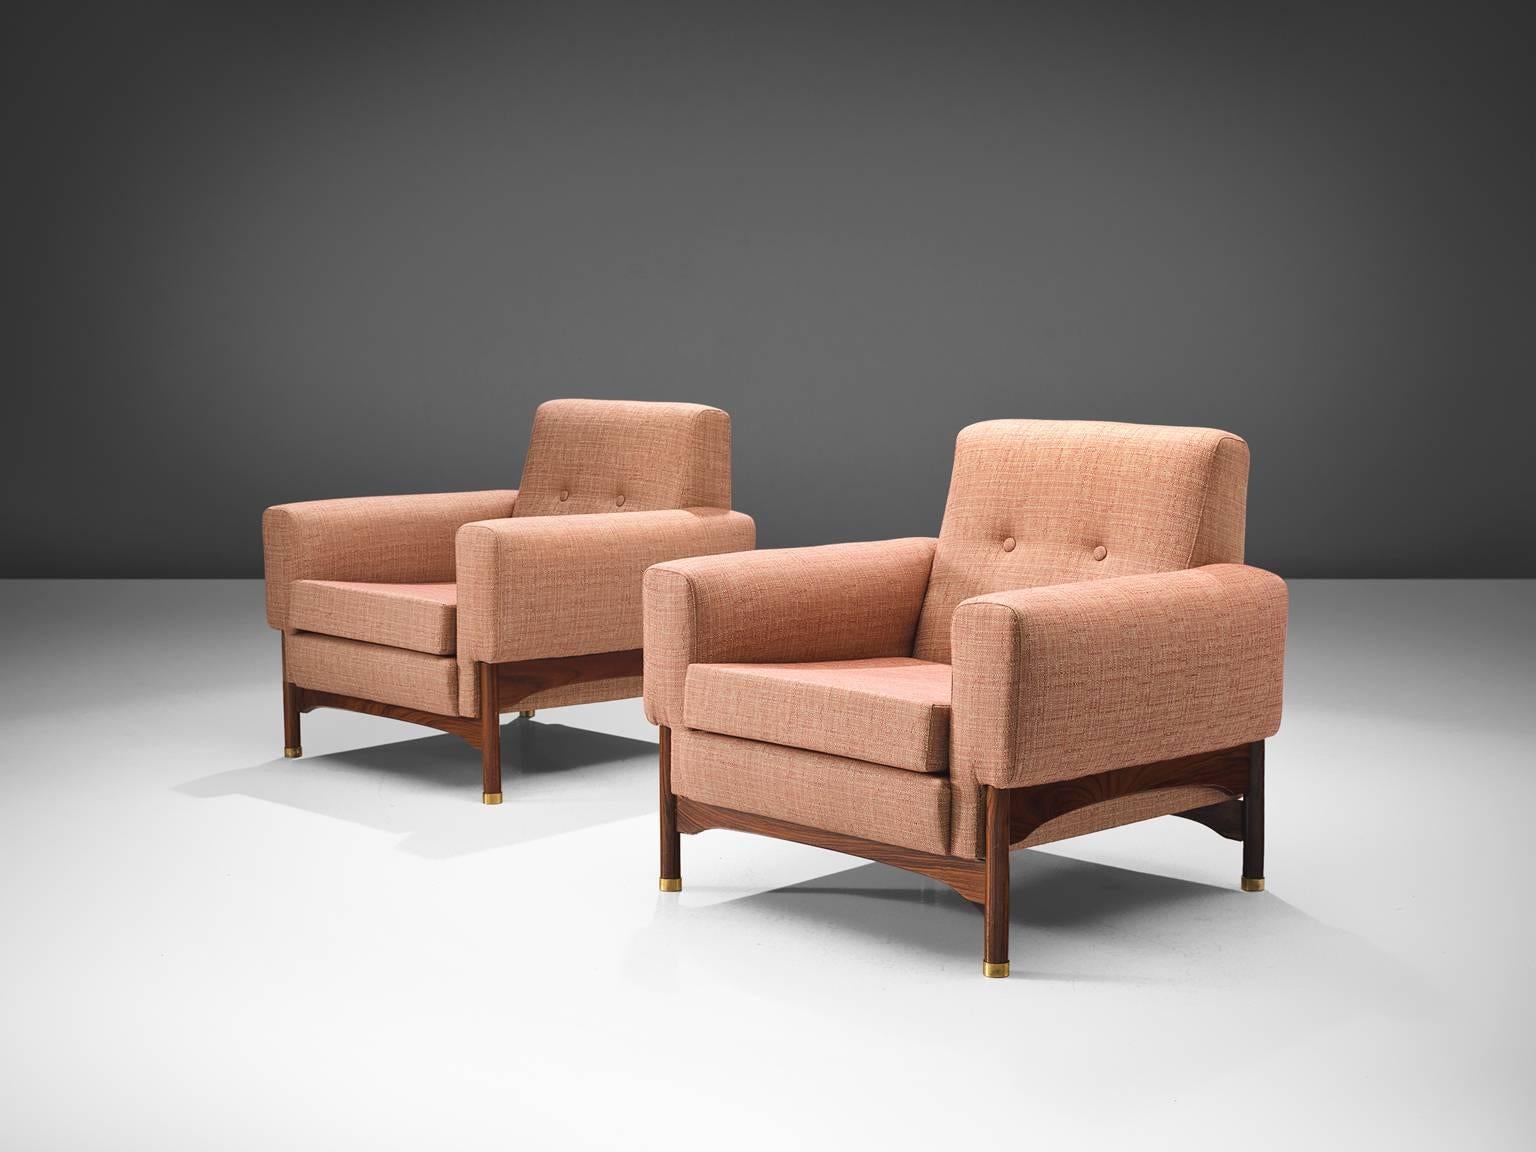 Pair of lounge chairs pink upholstery, rosewood, Italy, 1960s.

This elegant, geometric pair of lounge chairs feature a muted pink upholstery. The chairs stand on four little tapered wooden legs that support the seat. Eloquent detail is the slight